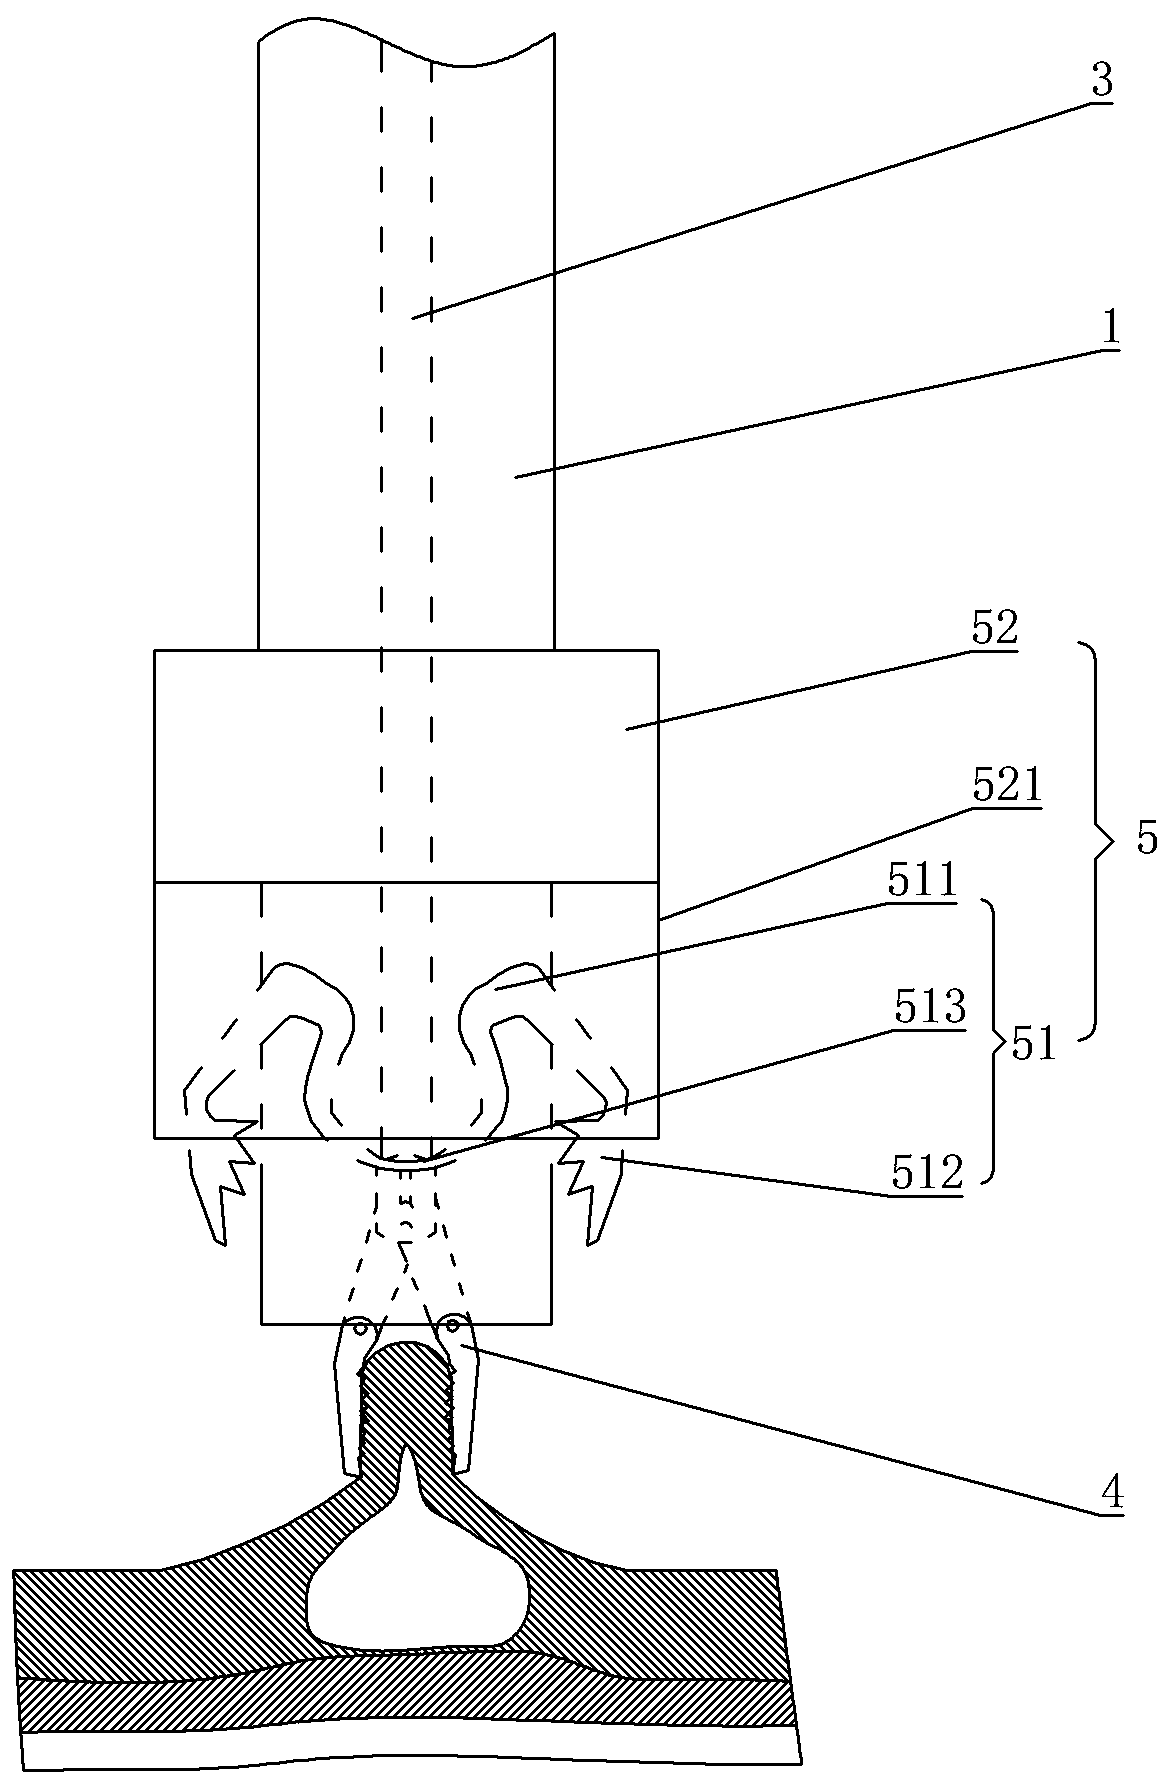 Full-thickness excising device